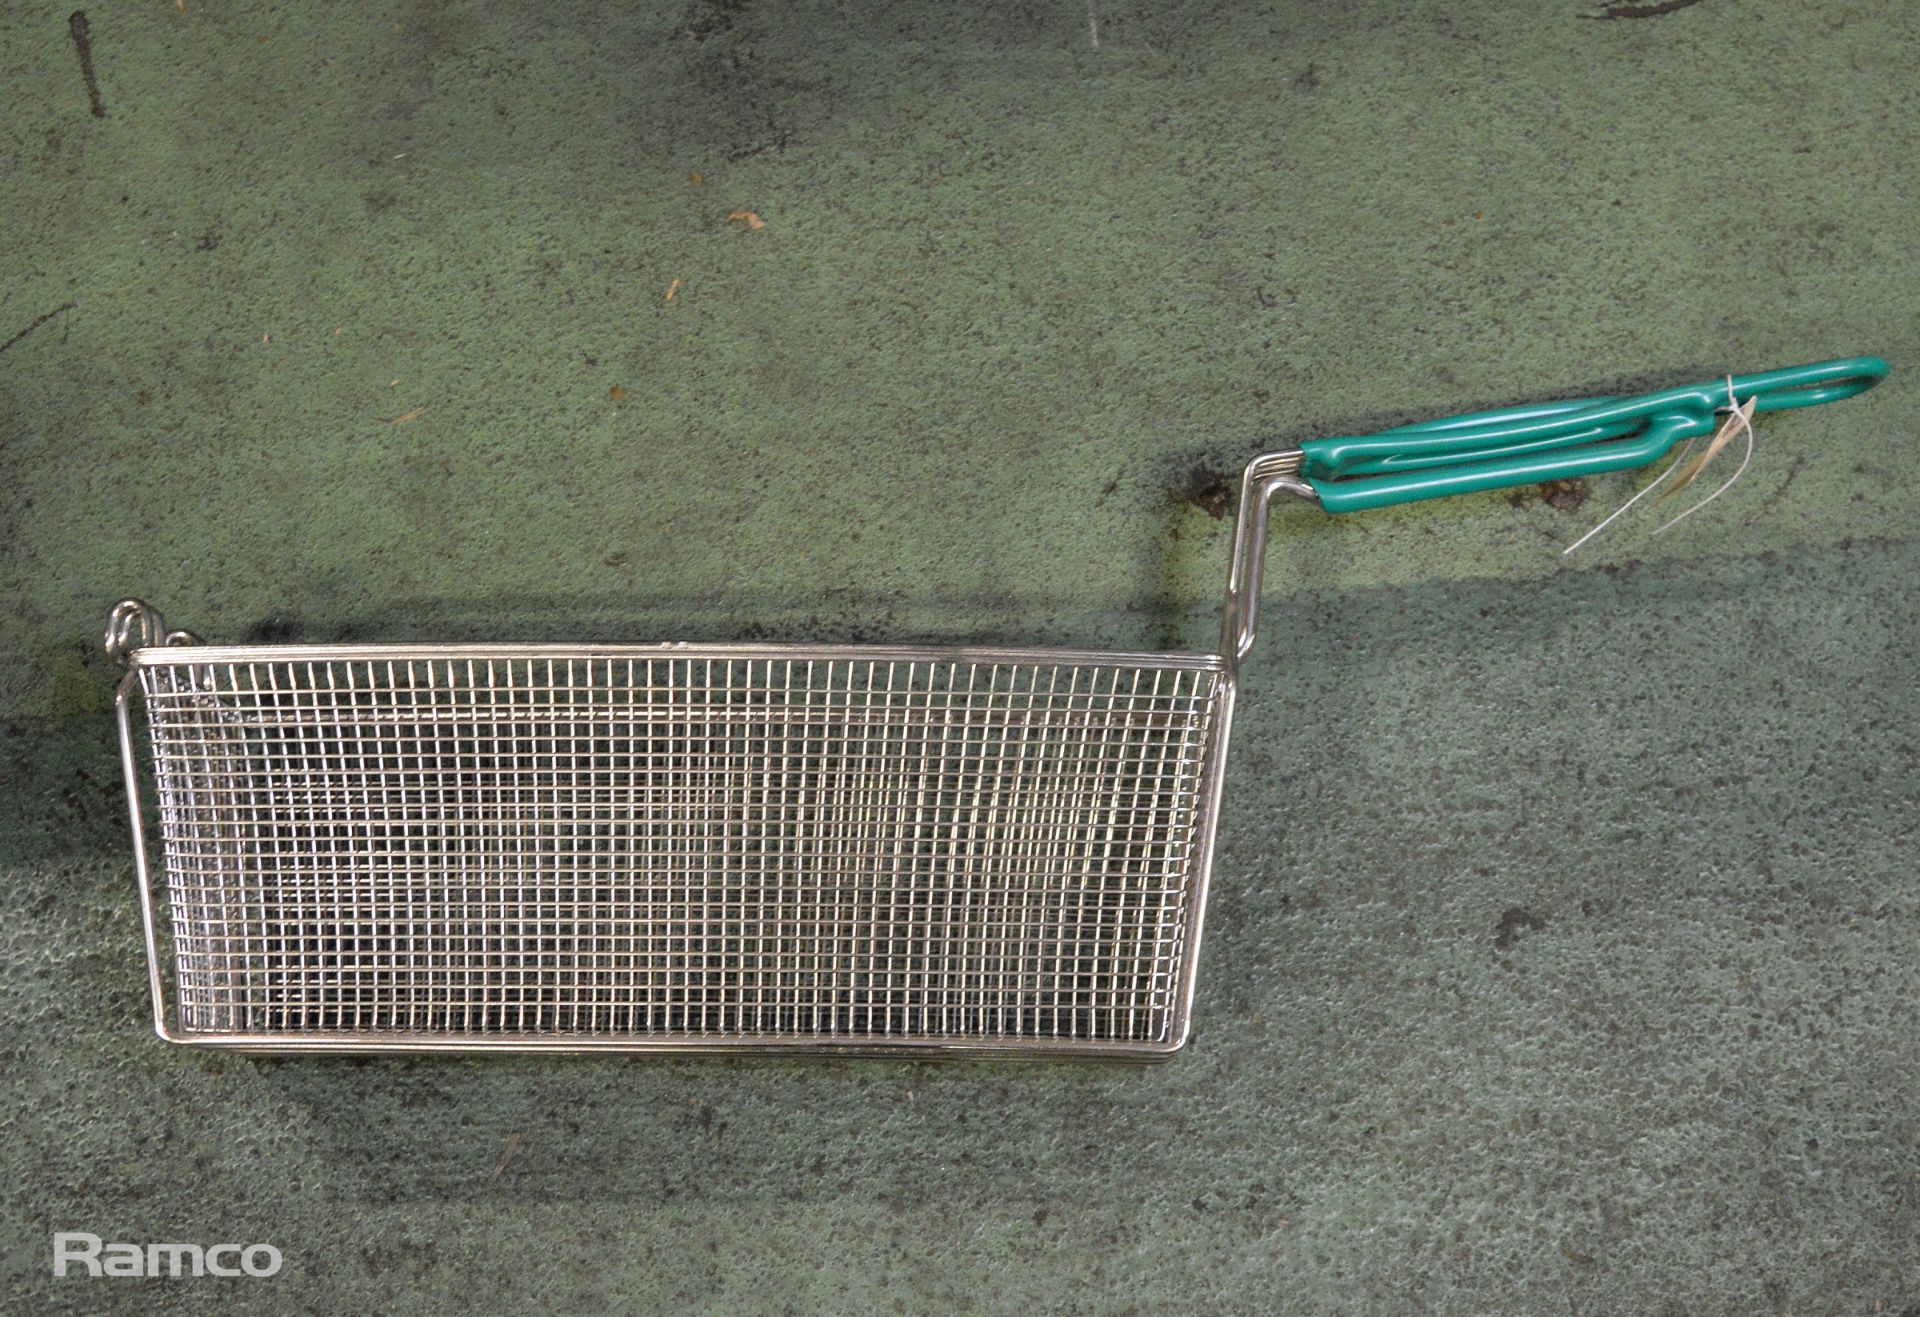 10x Frying Baskets With Grip L 440mm x W 140mm x H 160mm - Image 3 of 3